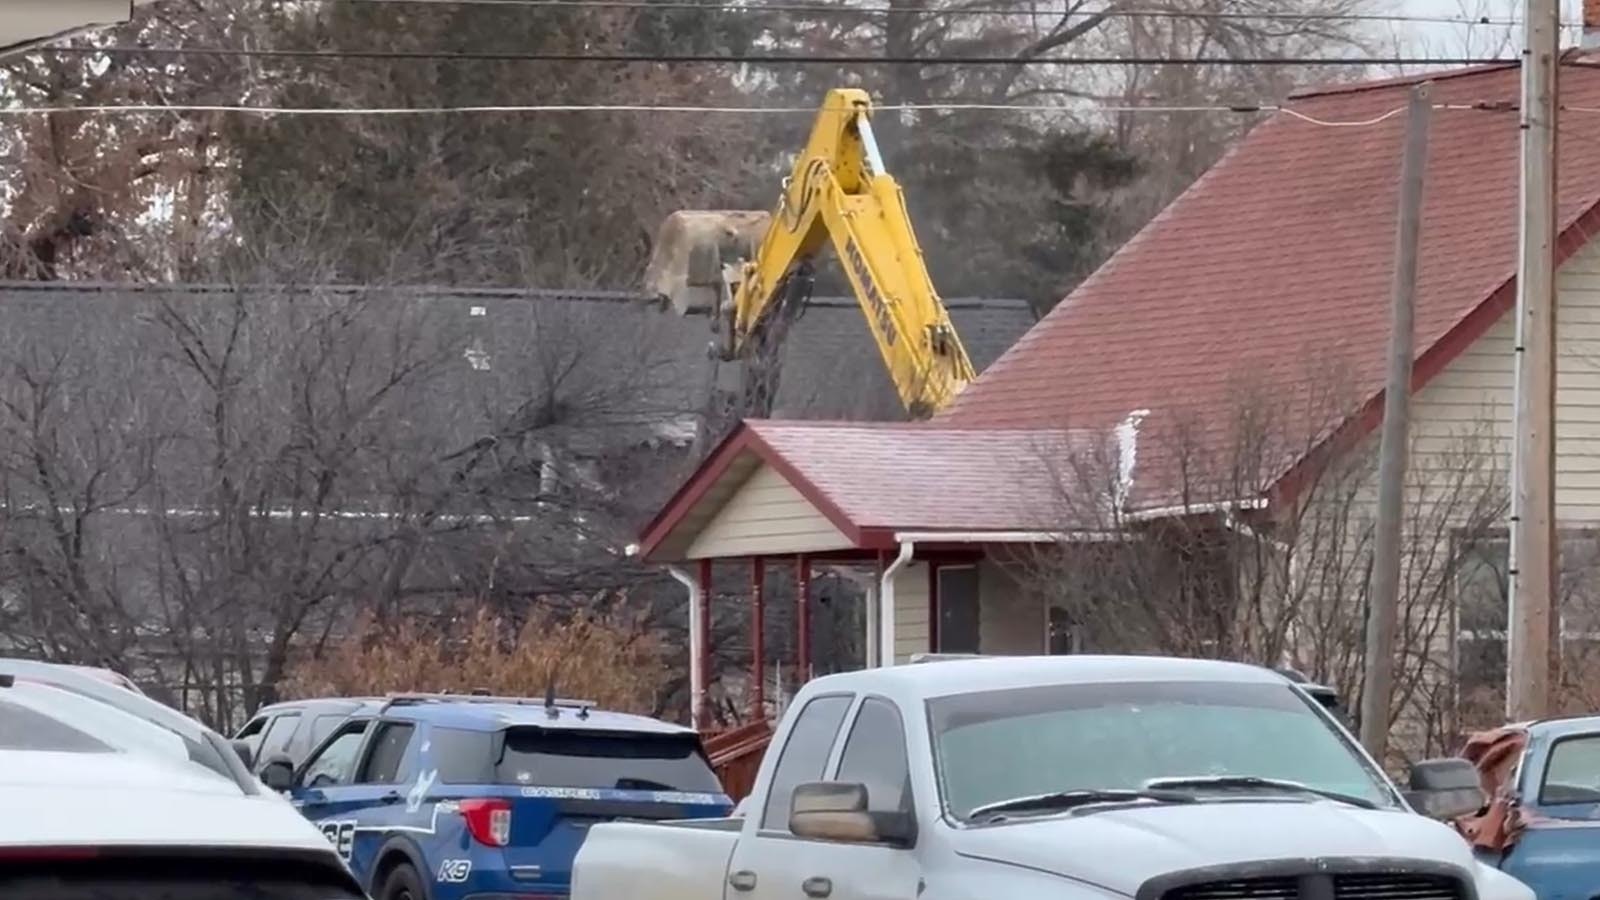 An excavator is used to rip open a house in Sheridan where a suspected cop killer had barricaded himself.